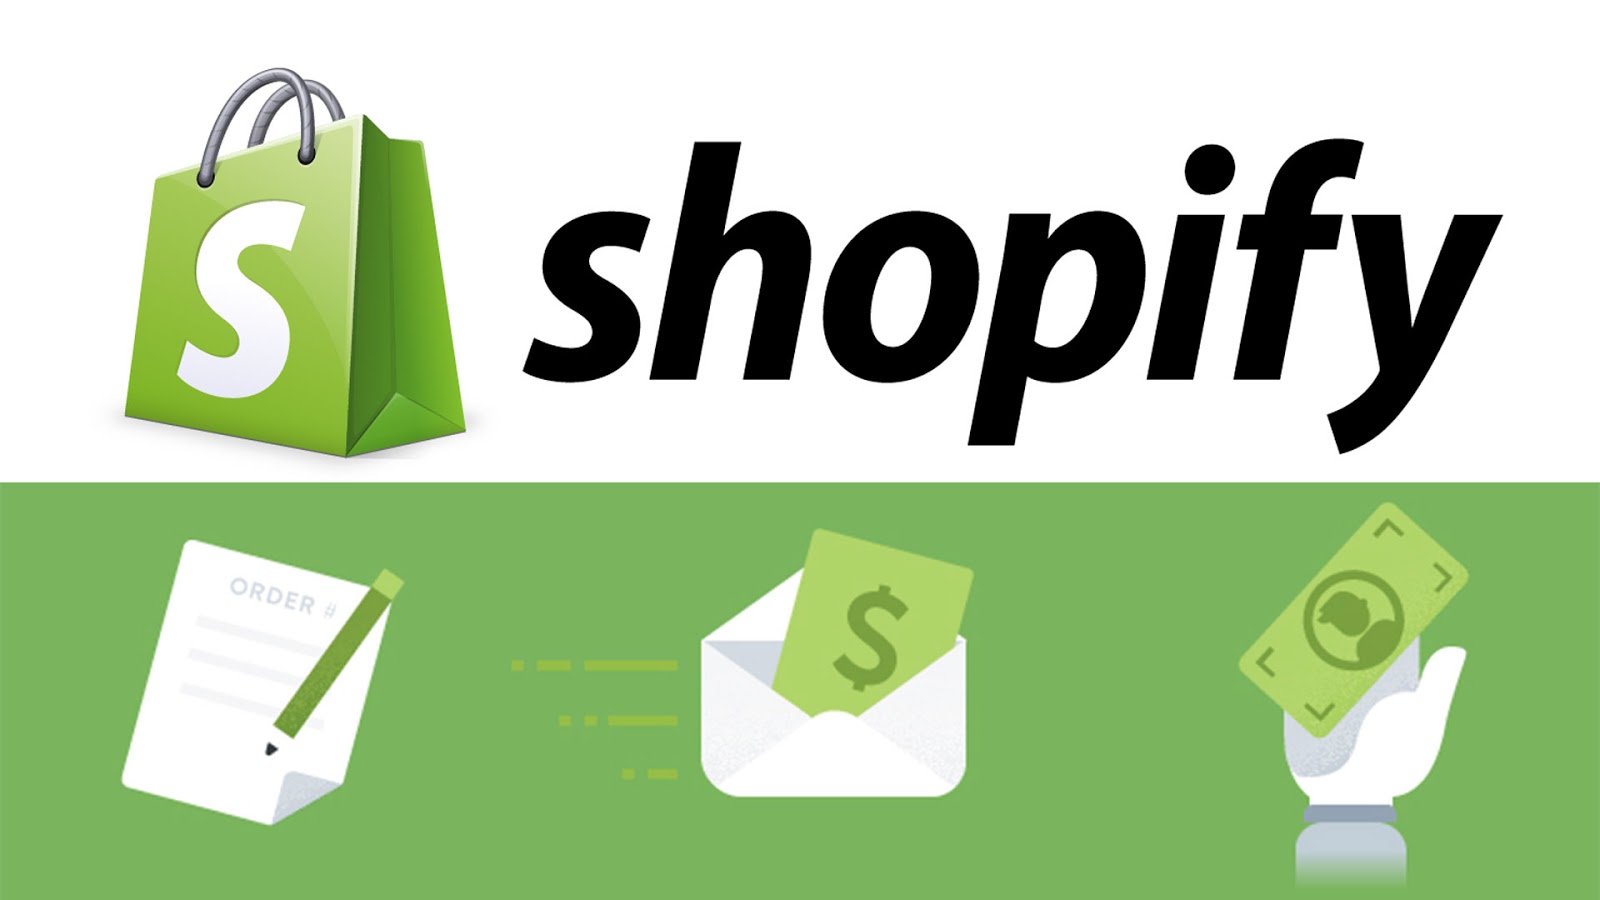 Learn About Ecommerce With a Paid Shopify Internship 17